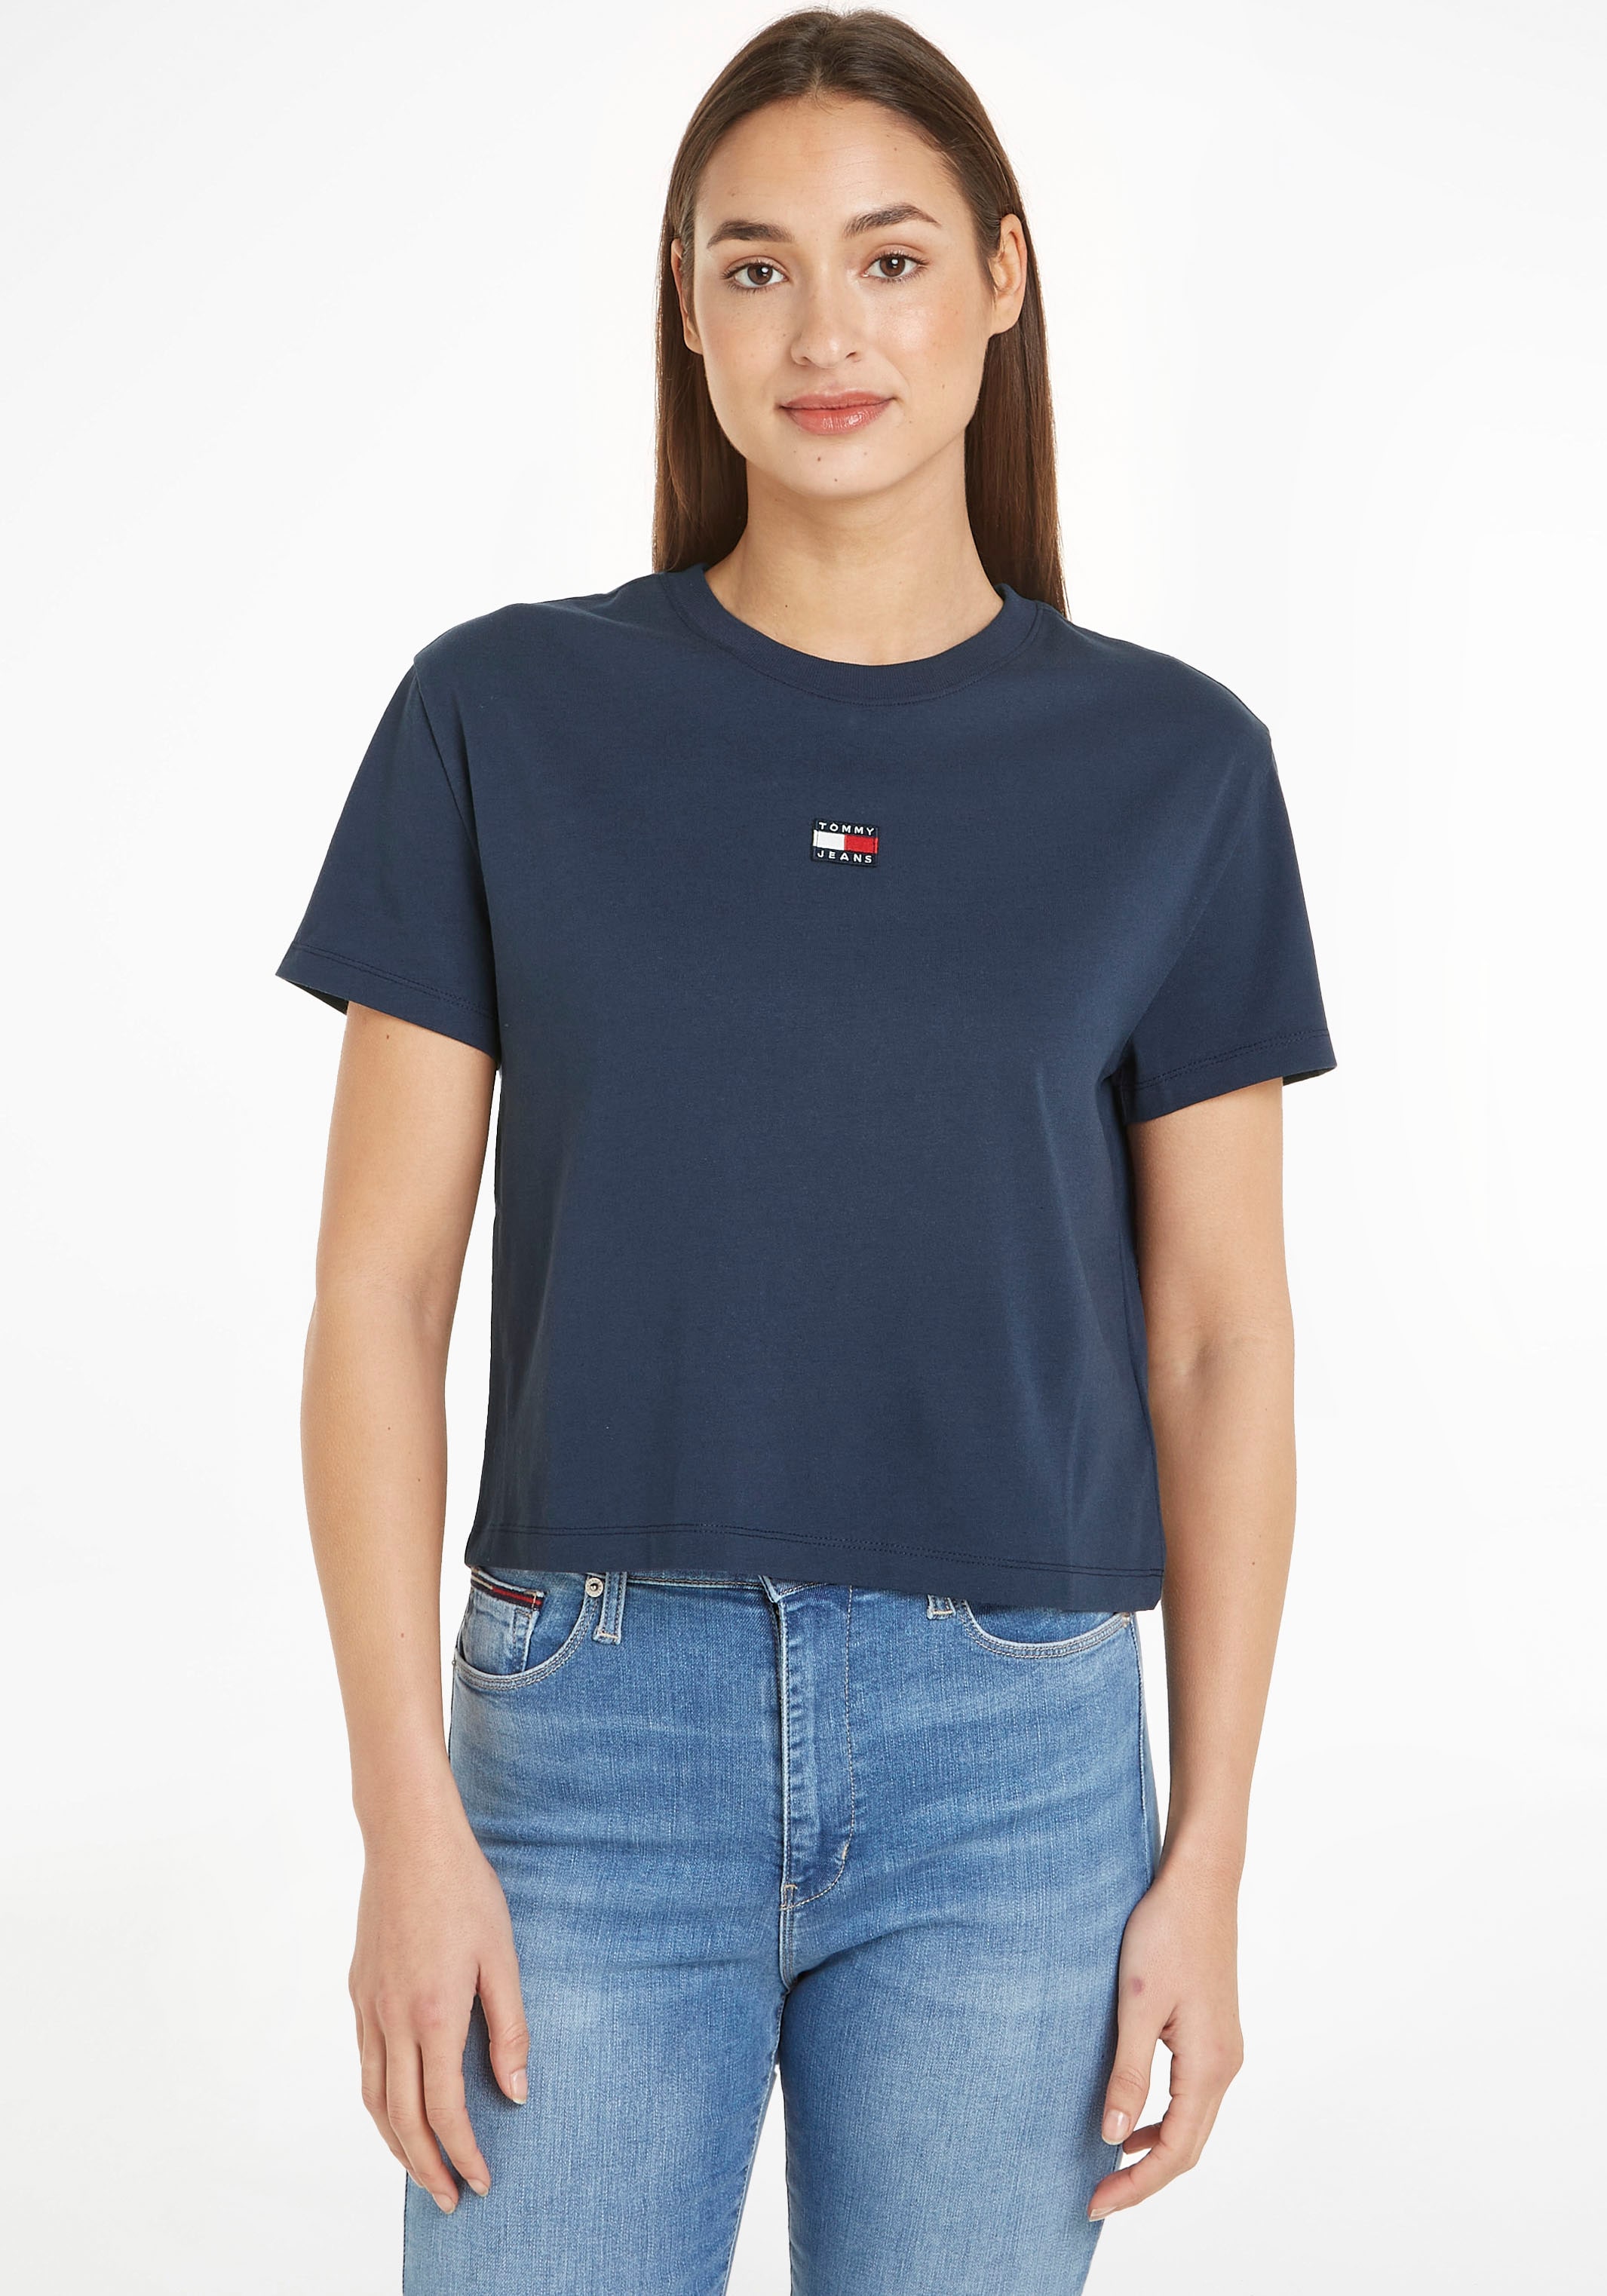 Tommy Jeans CLS Brustkorb OTTO Jeans mit T-Shirt Tommy »TJW am Online Shop im TEE«, XS Logostickerei BADGE